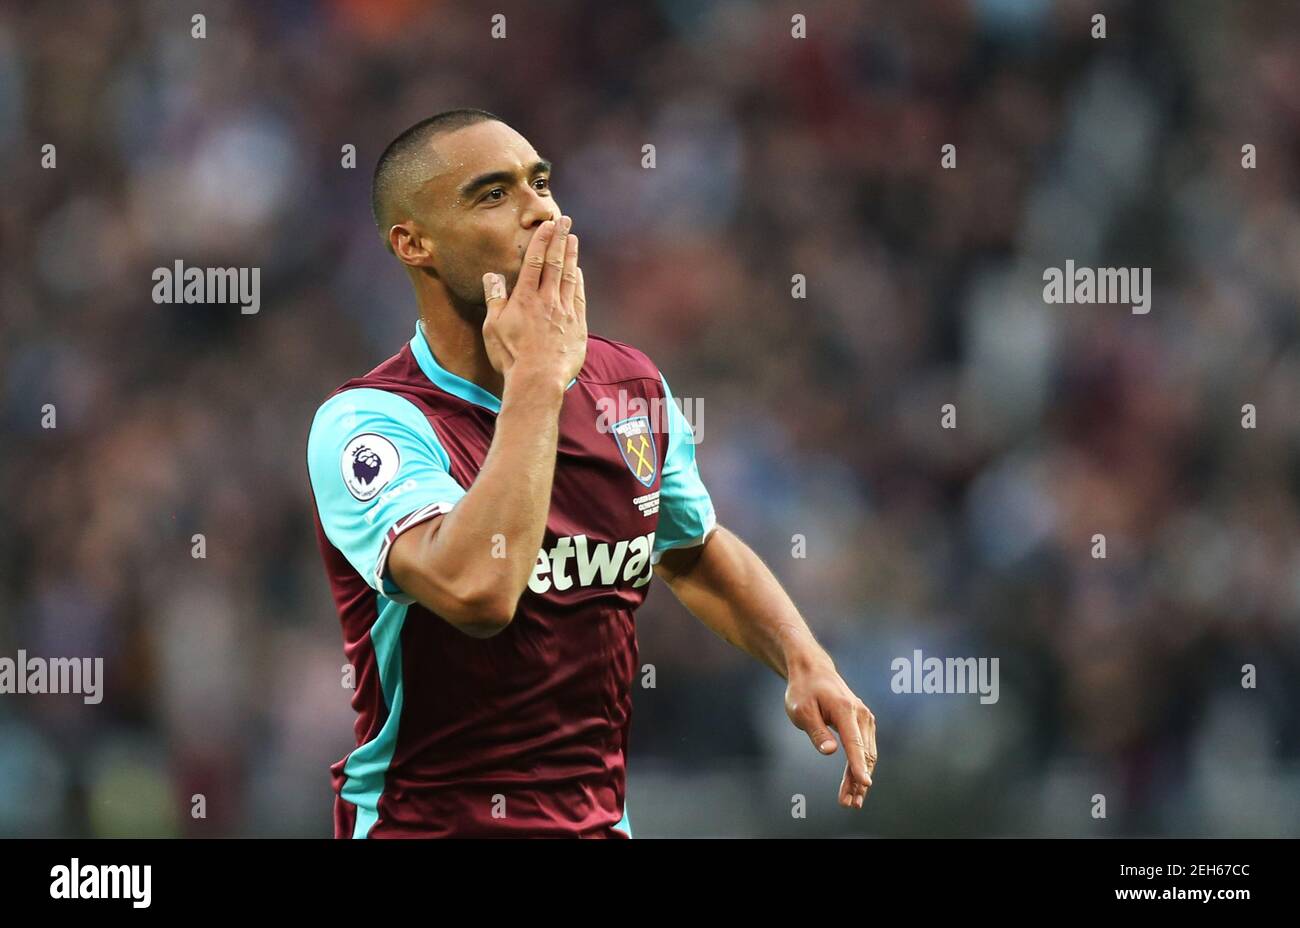 Britain Soccer Football - West Ham United v Sunderland - Premier League - London Stadium - 22/10/16 West Ham United's Winston Reid celebrates scoring their first goal  Reuters / Paul Hackett Livepic EDITORIAL USE ONLY. No use with unauthorized audio, video, data, fixture lists, club/league logos or 'live' services. Online in-match use limited to 45 images, no video emulation. No use in betting, games or single club/league/player publications.  Please contact your account representative for further details. Stock Photo